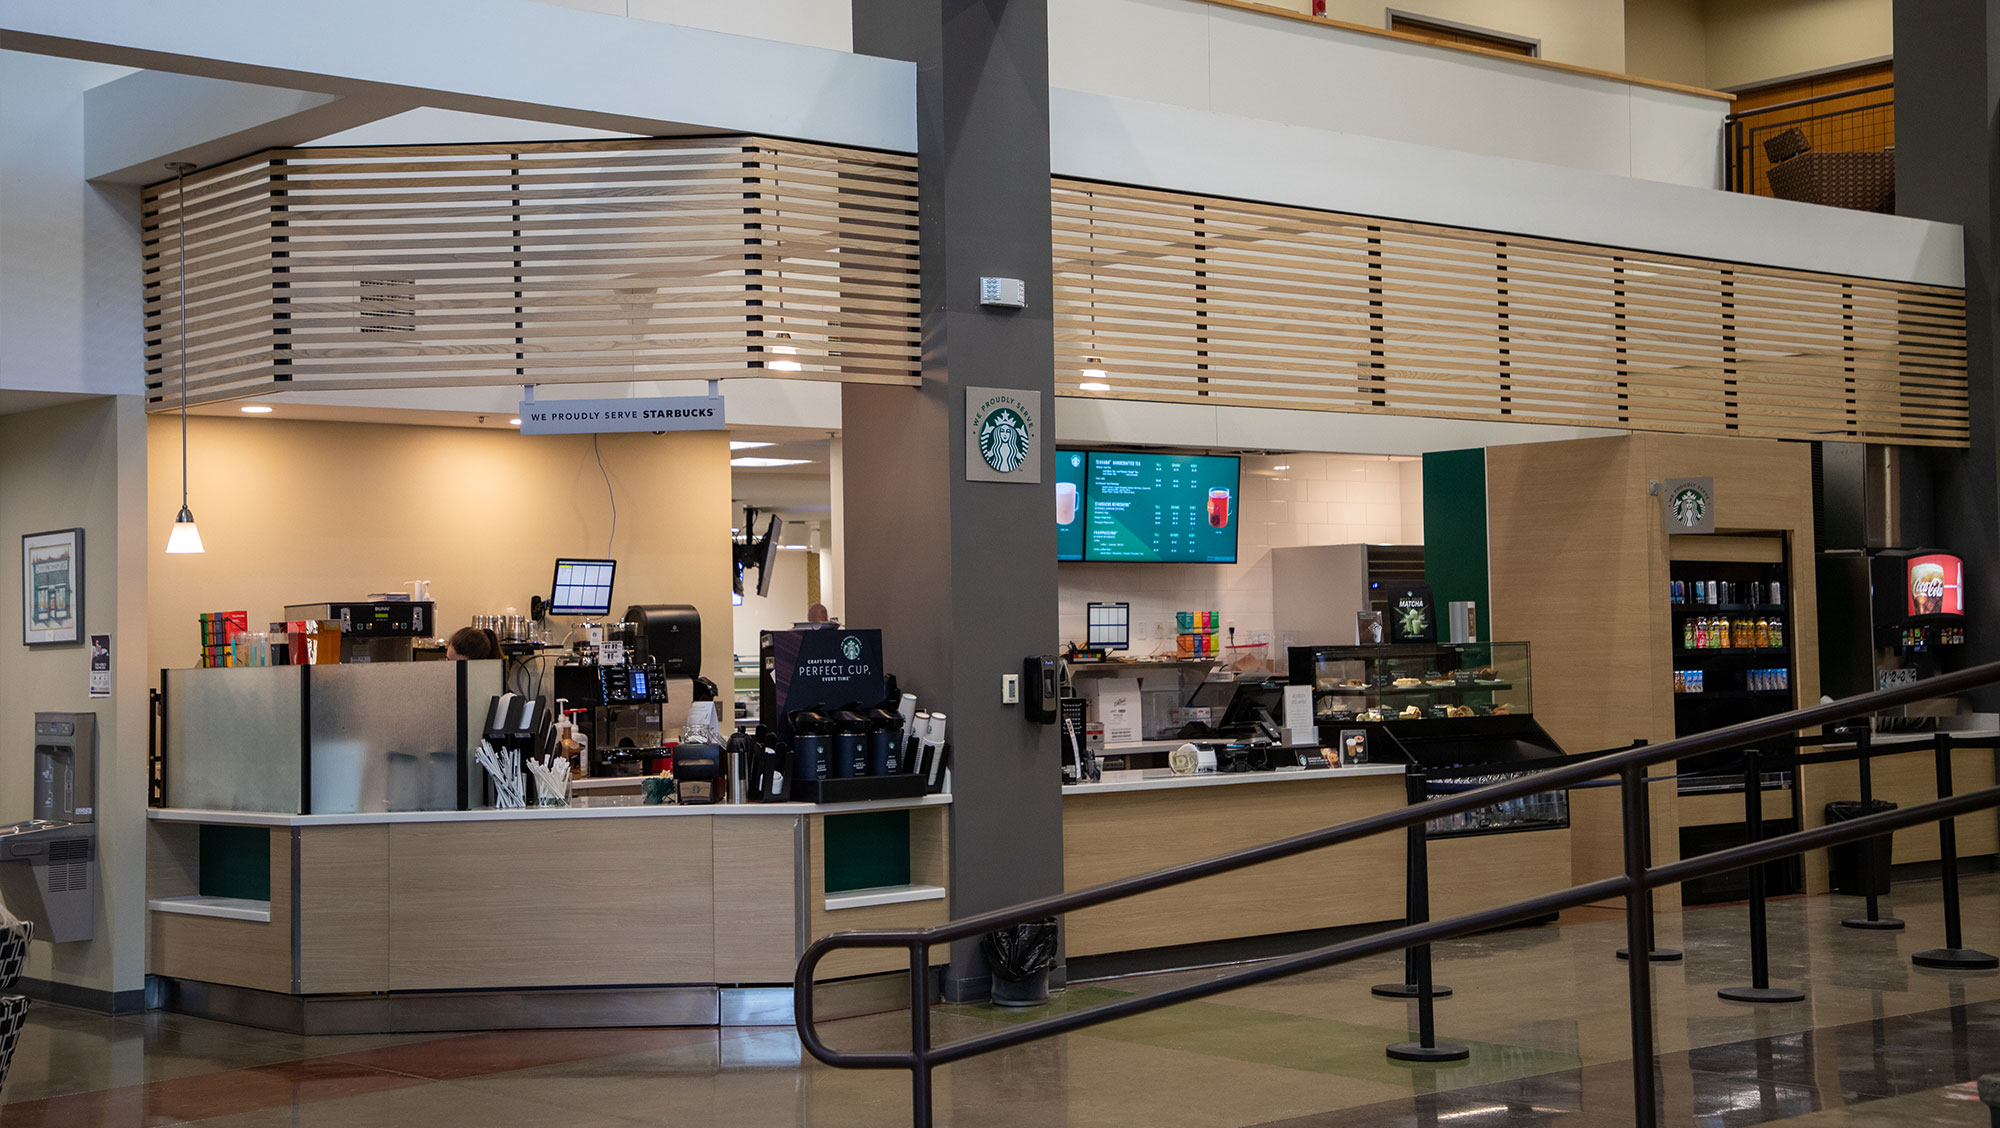 Image of Union Coffee, a Starbucks coffee station in the BHSU student union.